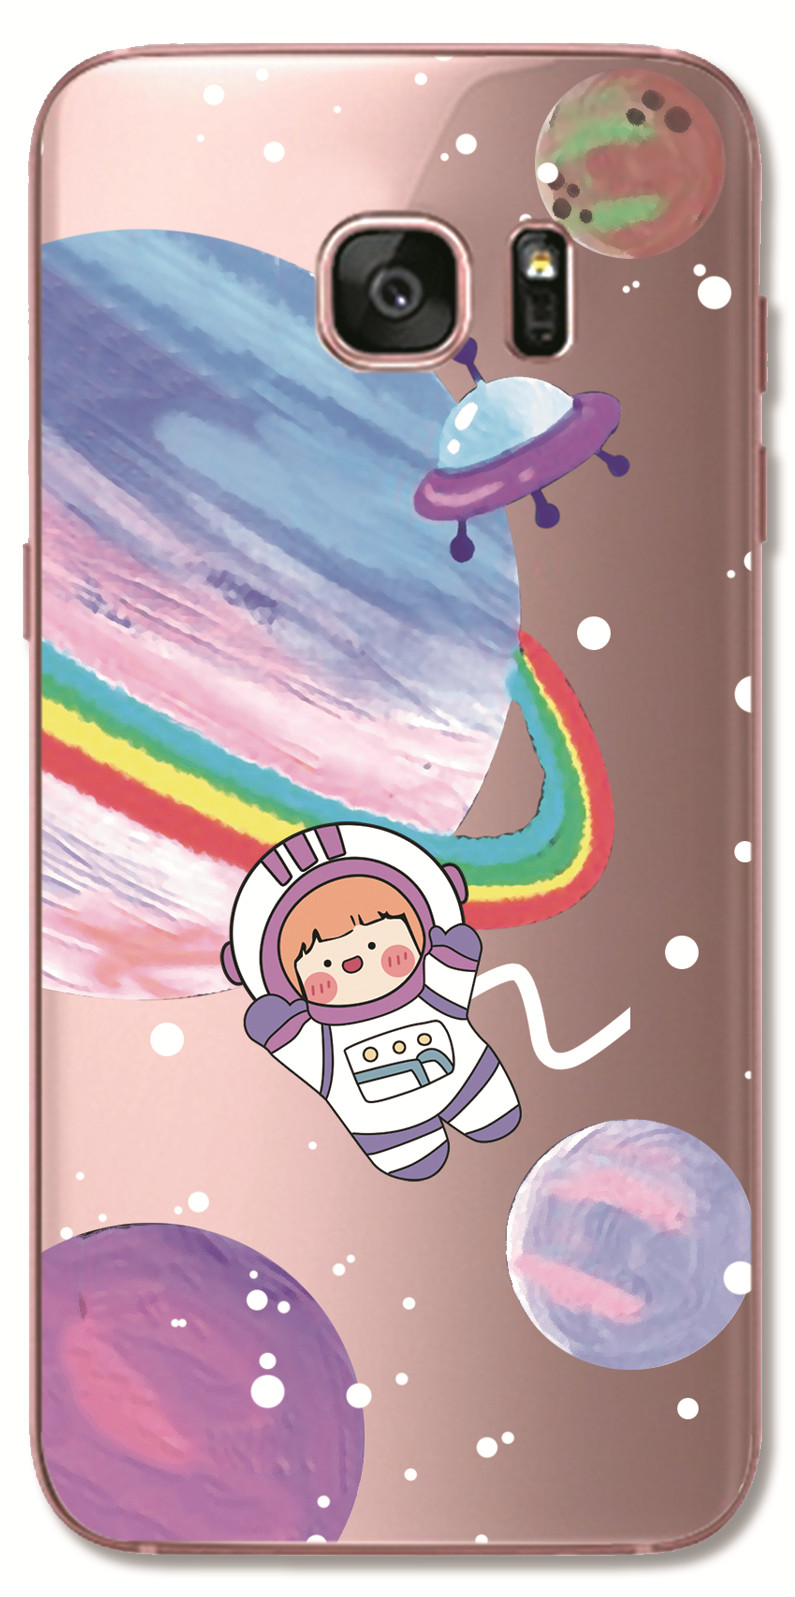 Samsung Galaxy S5 S7 S6 Edge Plus INS Cute Cartoon Big eyes furry Monster Clear Soft Silicone TPU Phone Casing Lovely Space Astronaut Spaceship Case Back Cover Couple